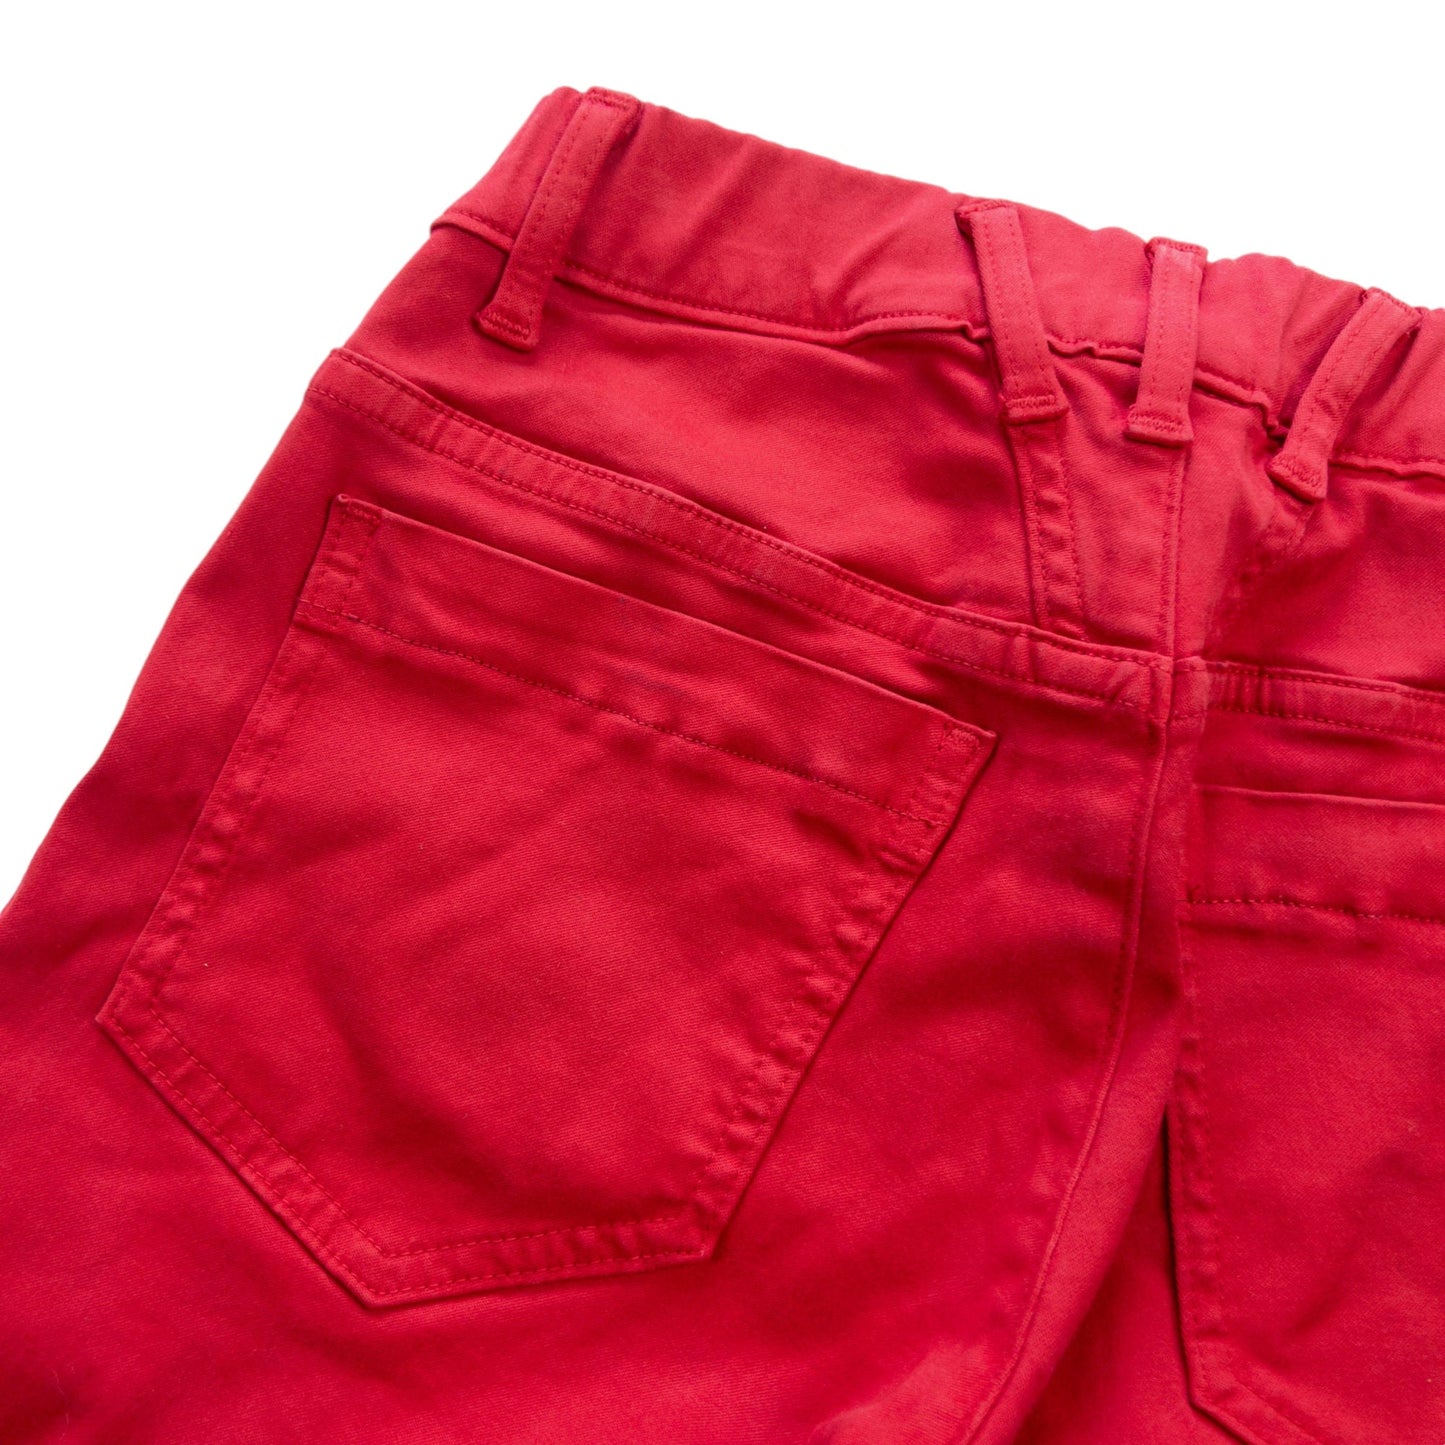 Vintage Marithe + Francois Girbaud Red Stretch Trousers Women's Size W27